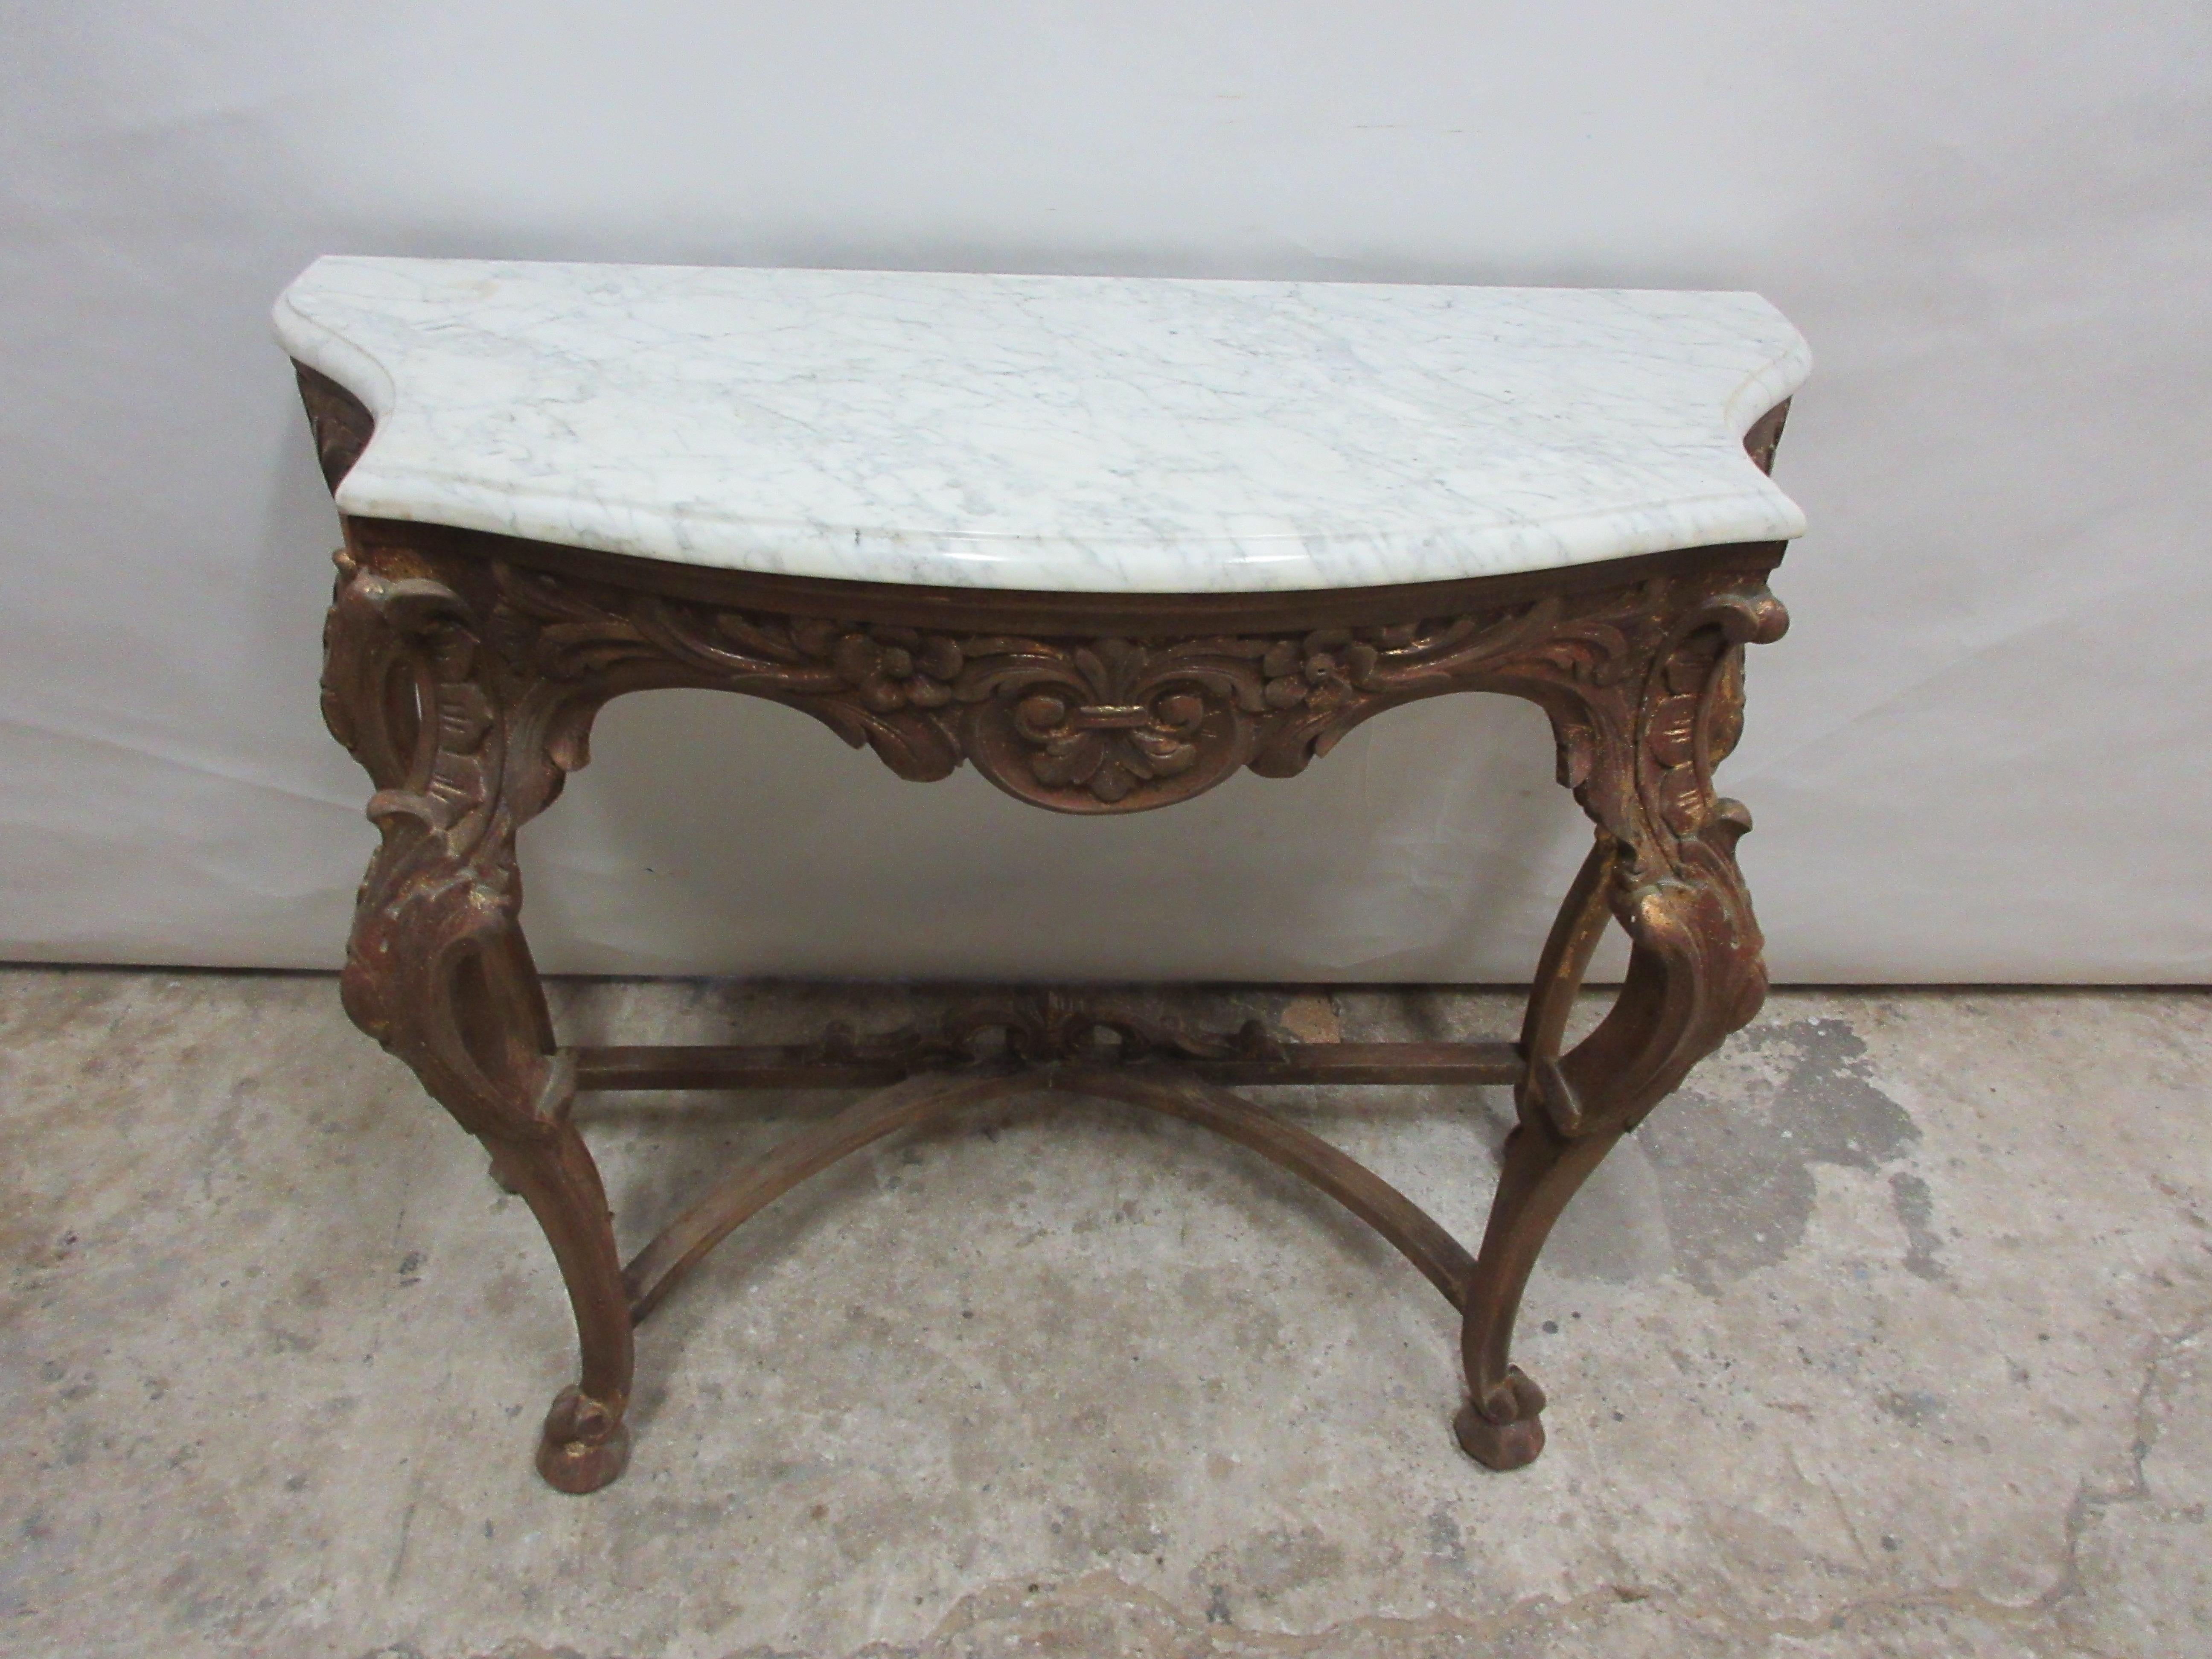 This is an original Swedish Rococo console table with a stone top.